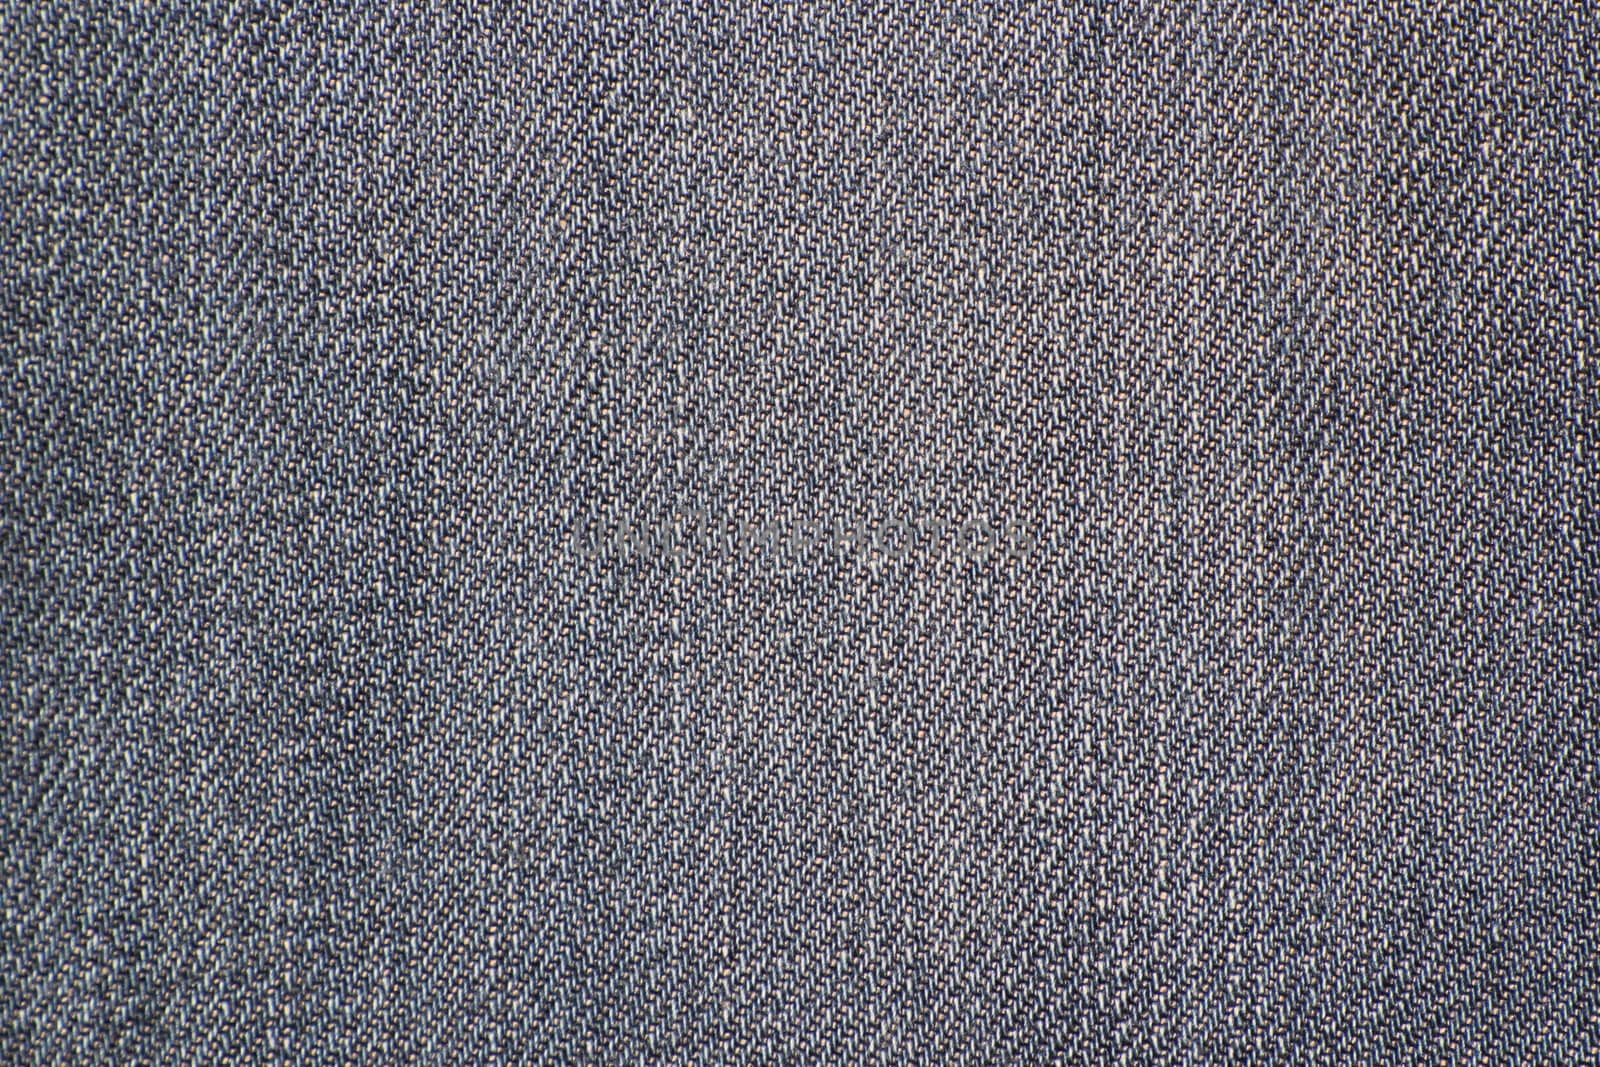 old denim texture from blue jeans